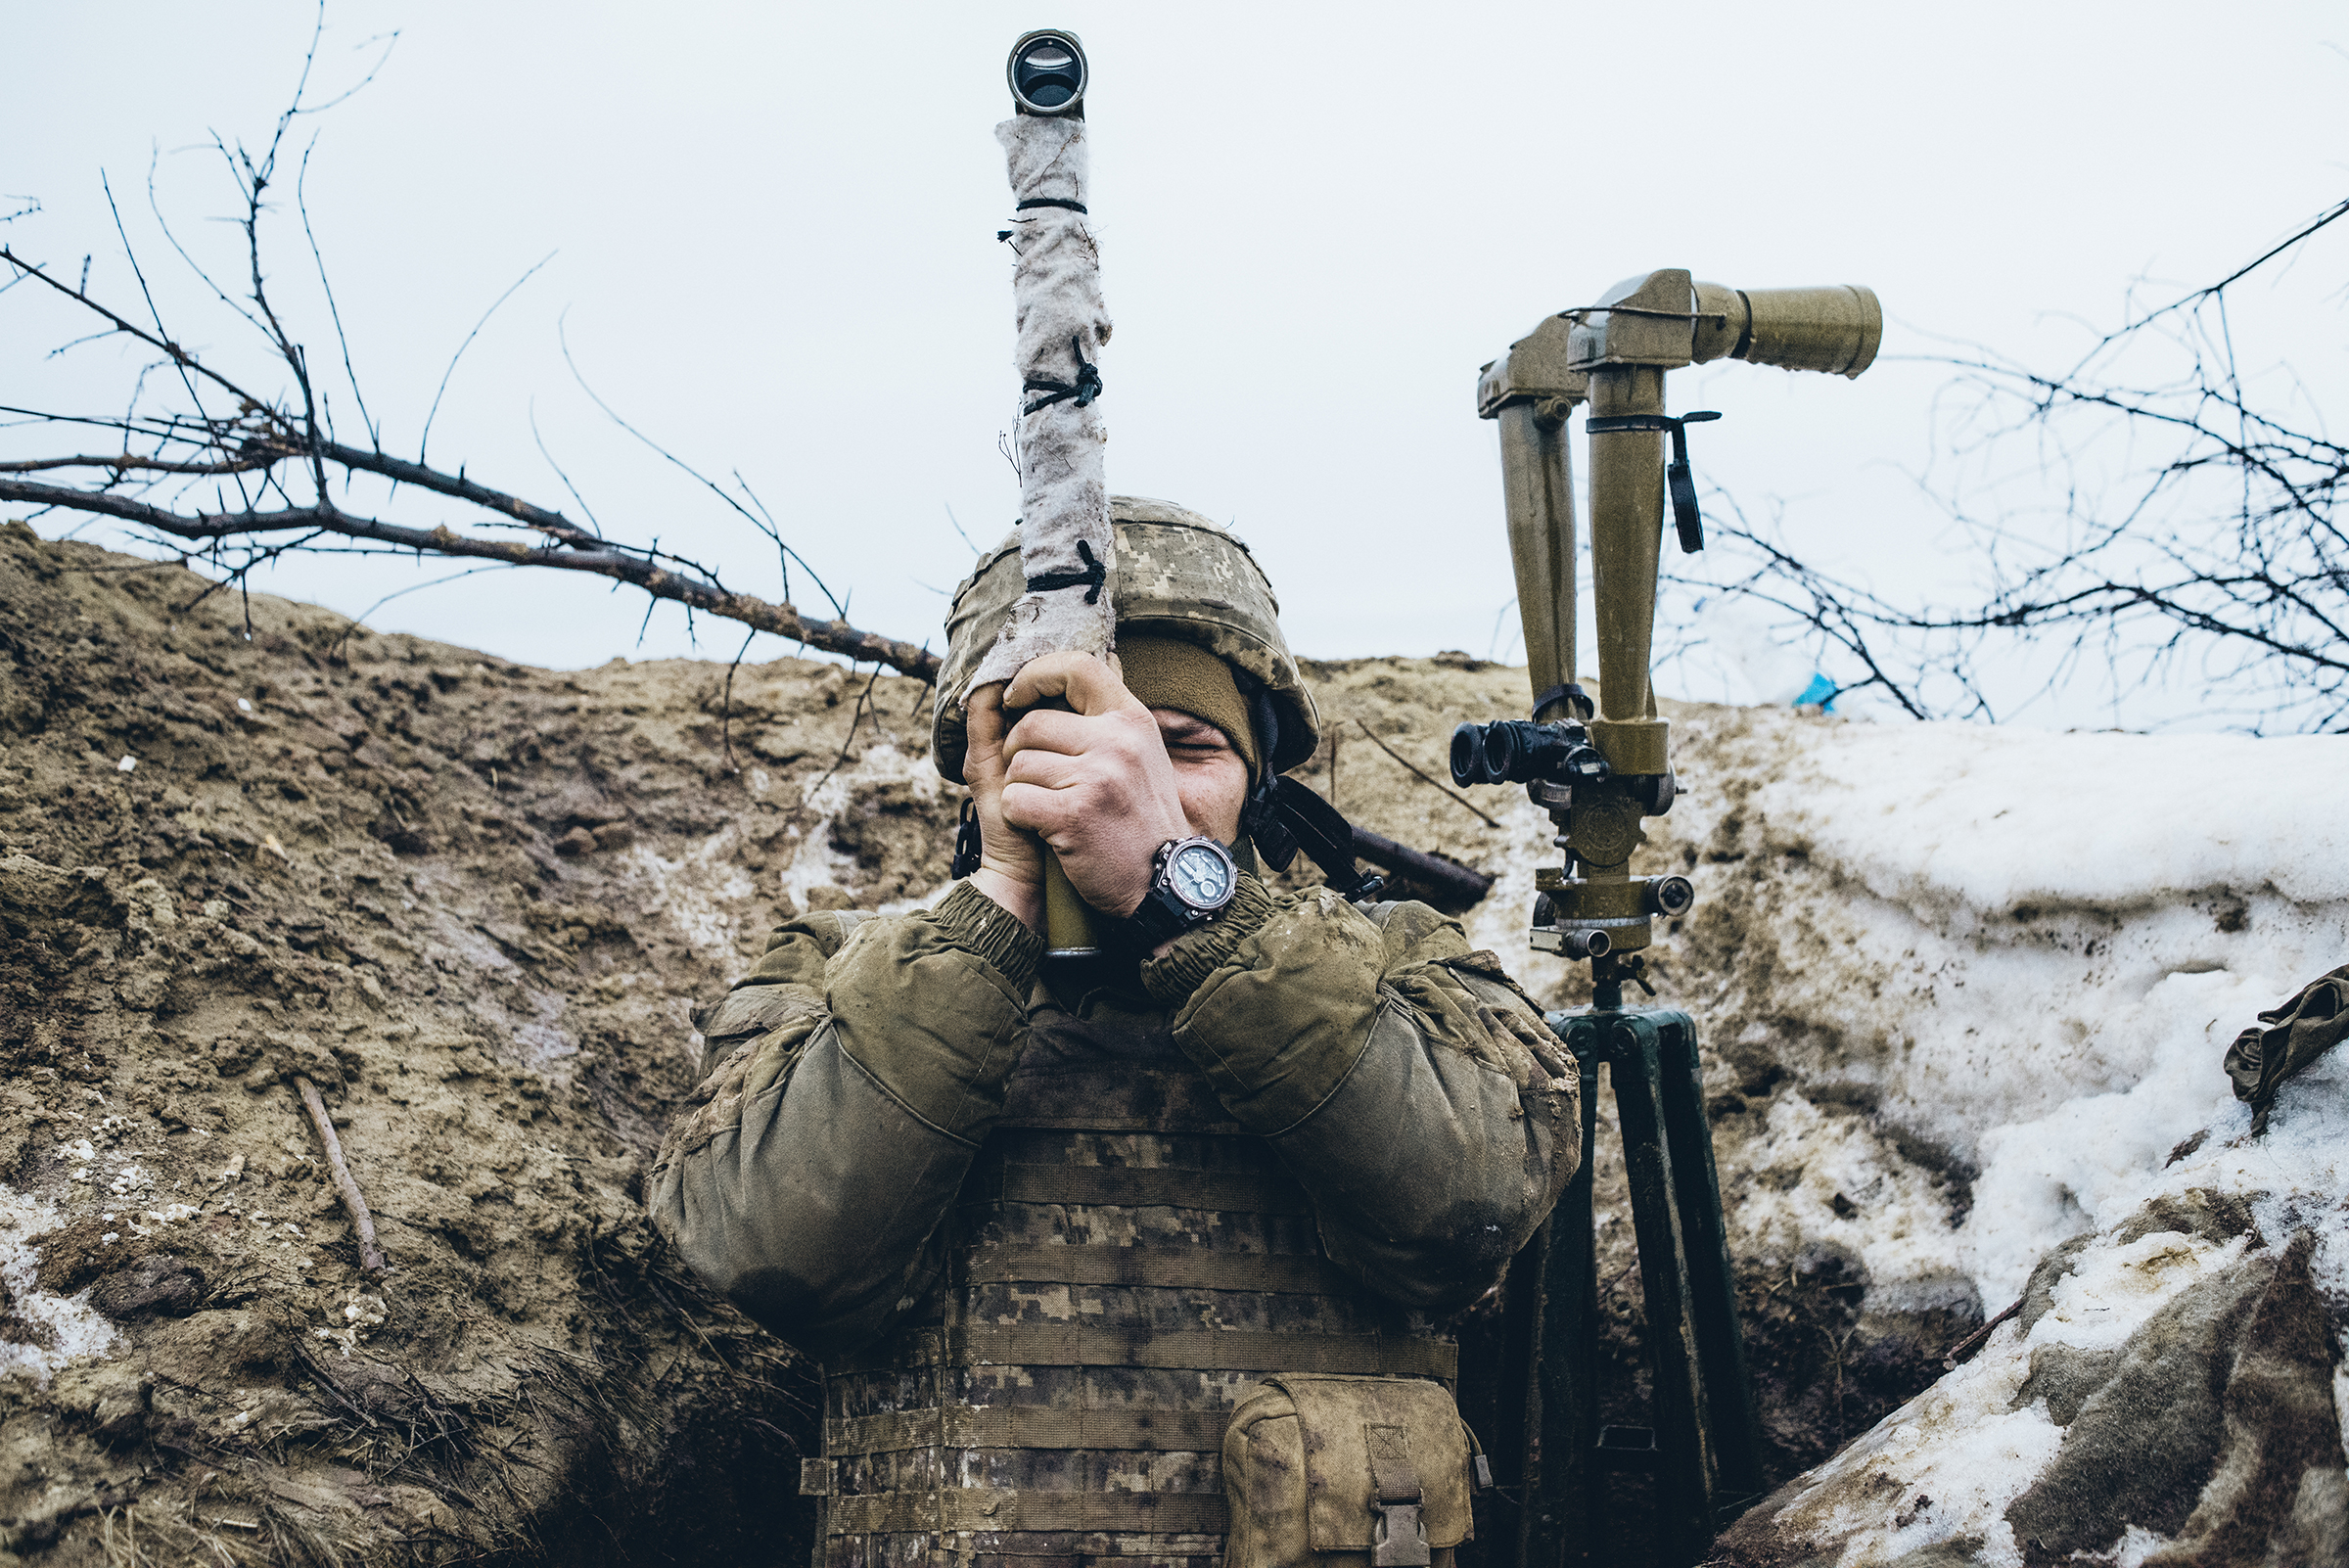 A Ukrainian soldier observes pro-Russian forces amassed on the front line in the breakaway Donetsk region of Ukraine on Feb. 8.